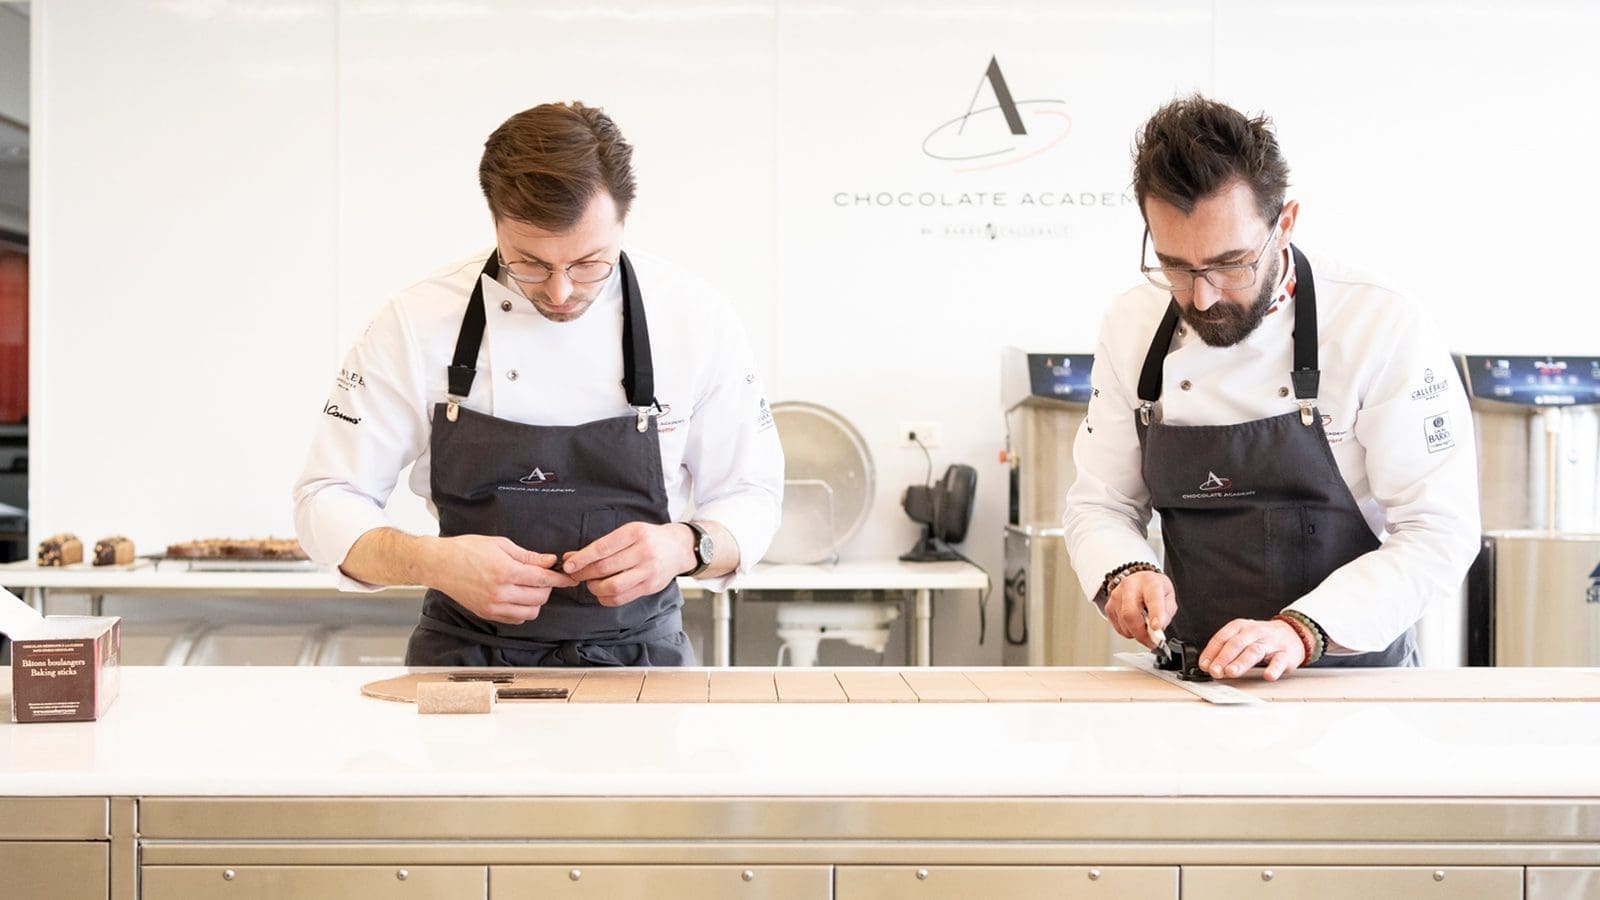 Barry Callebaut opens USA’s second Chocolate Academy Center in New York